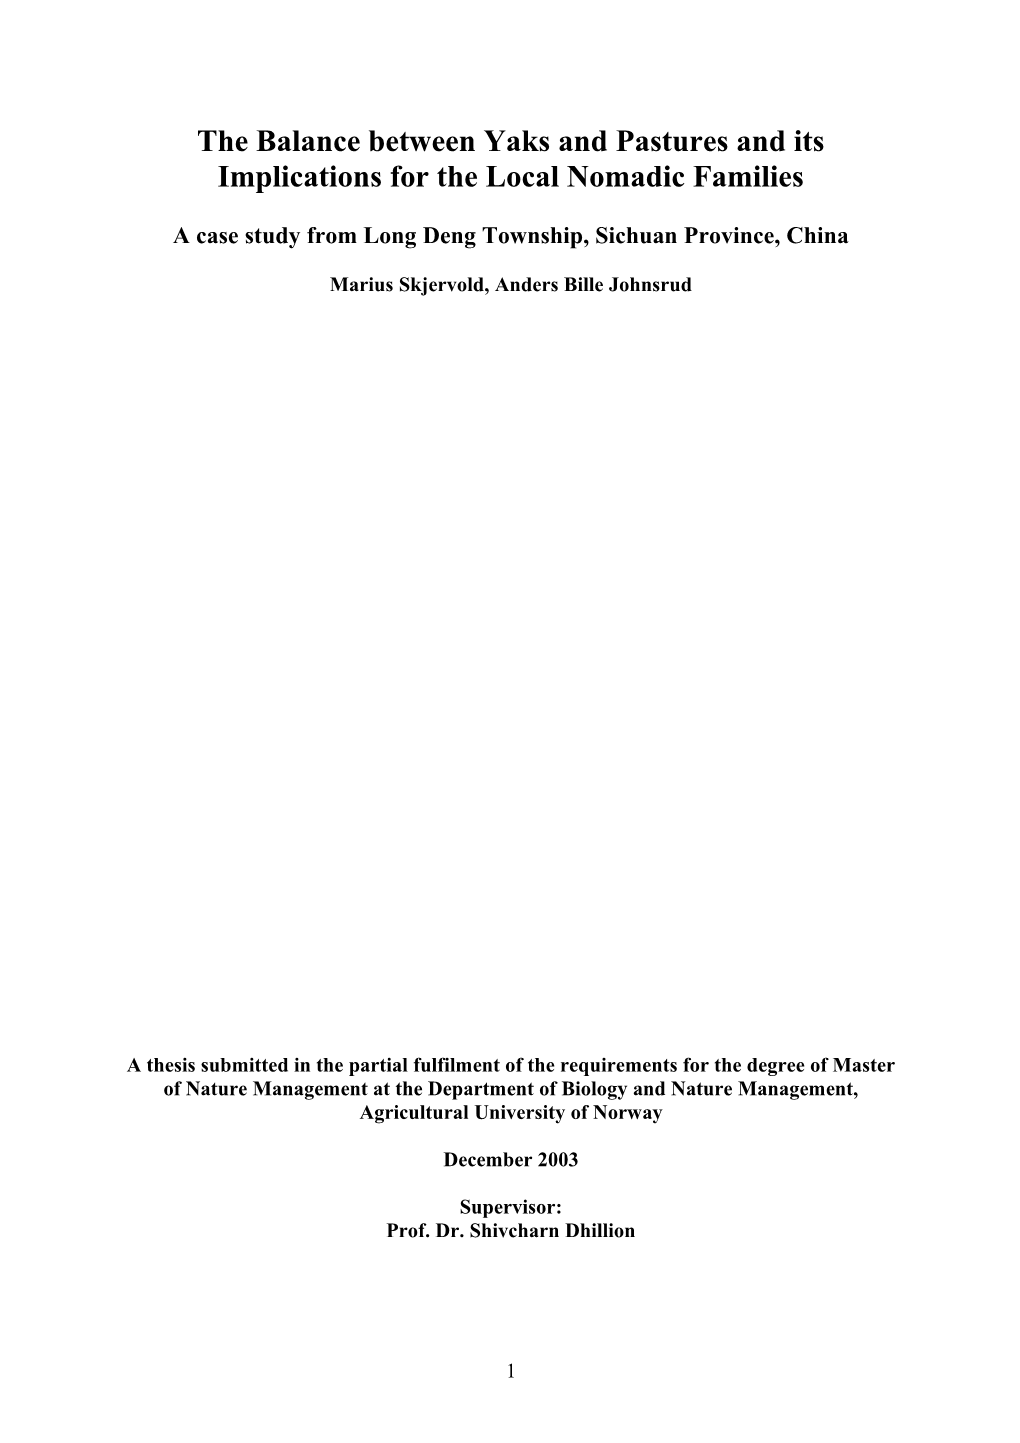 A Case Study from Long Deng Township, Sichuan Province, China